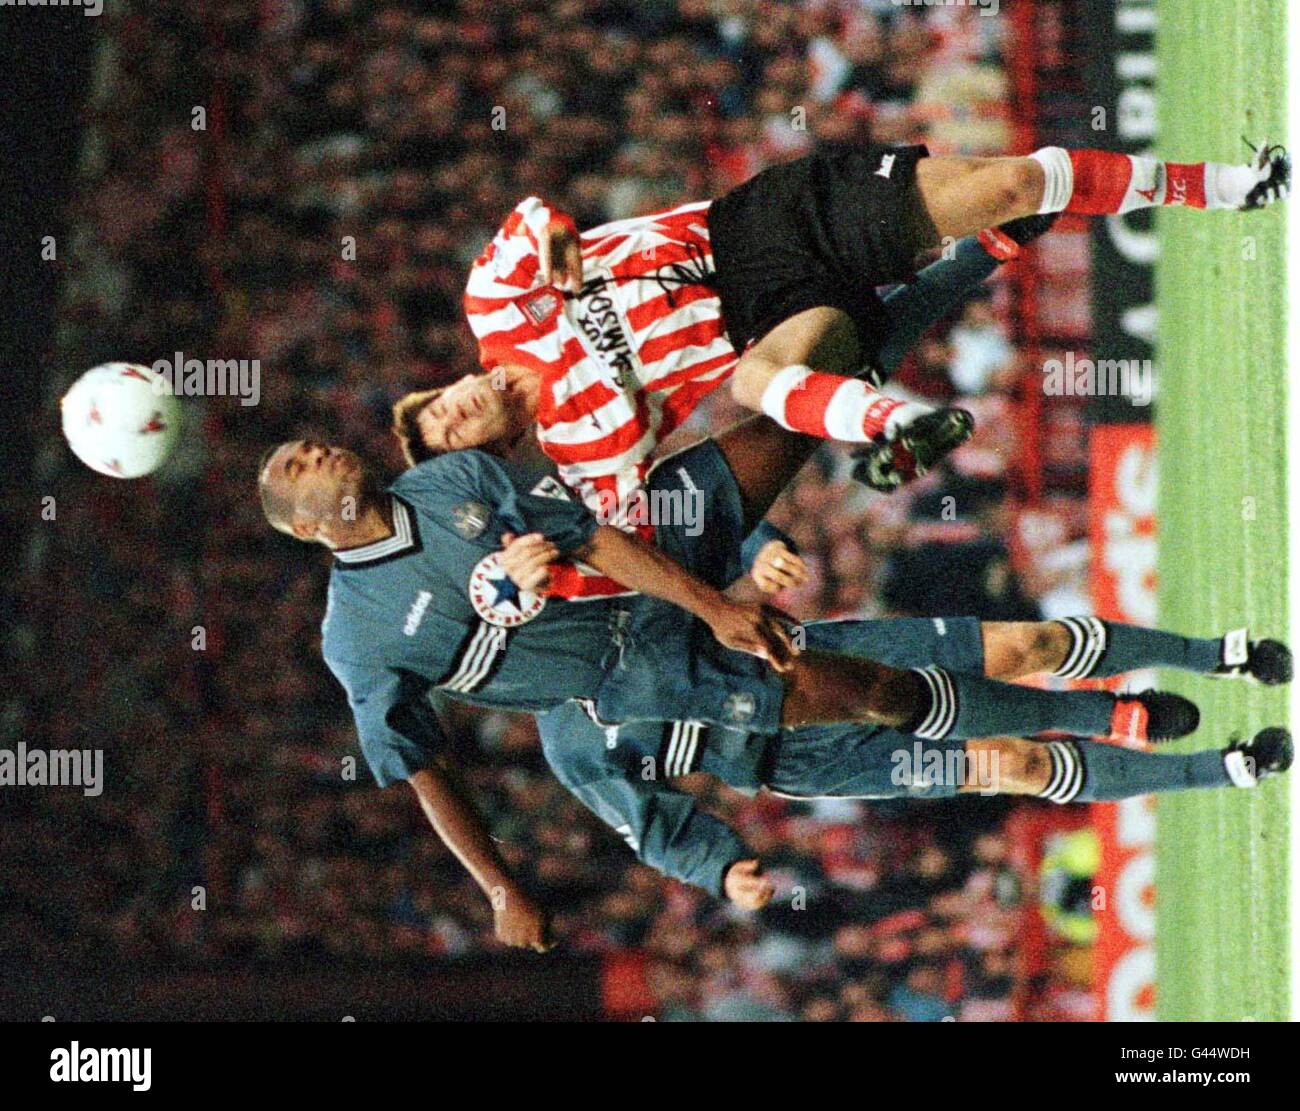 Newcastles Les Ferdinand (left) gets a head to the ball during their Premier League match against Sunderland at Roker Park this evening (Wednesday). Photo by Paul Barker/PA. **Sunderland player un-identified** Stock Photo